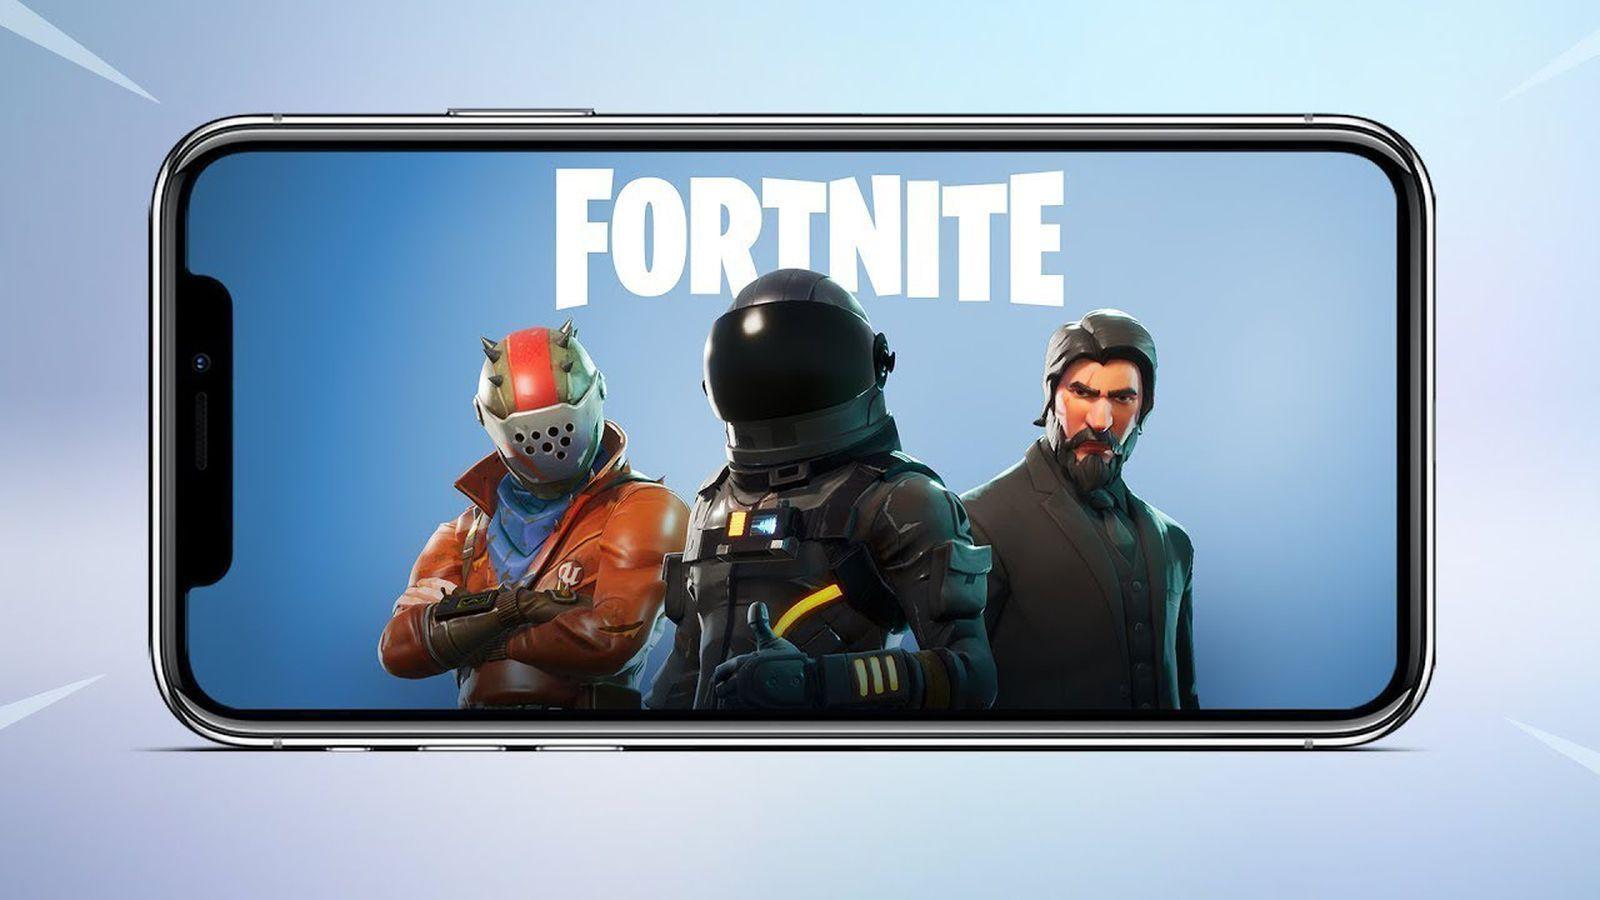 Fortnite characters on an iPhone